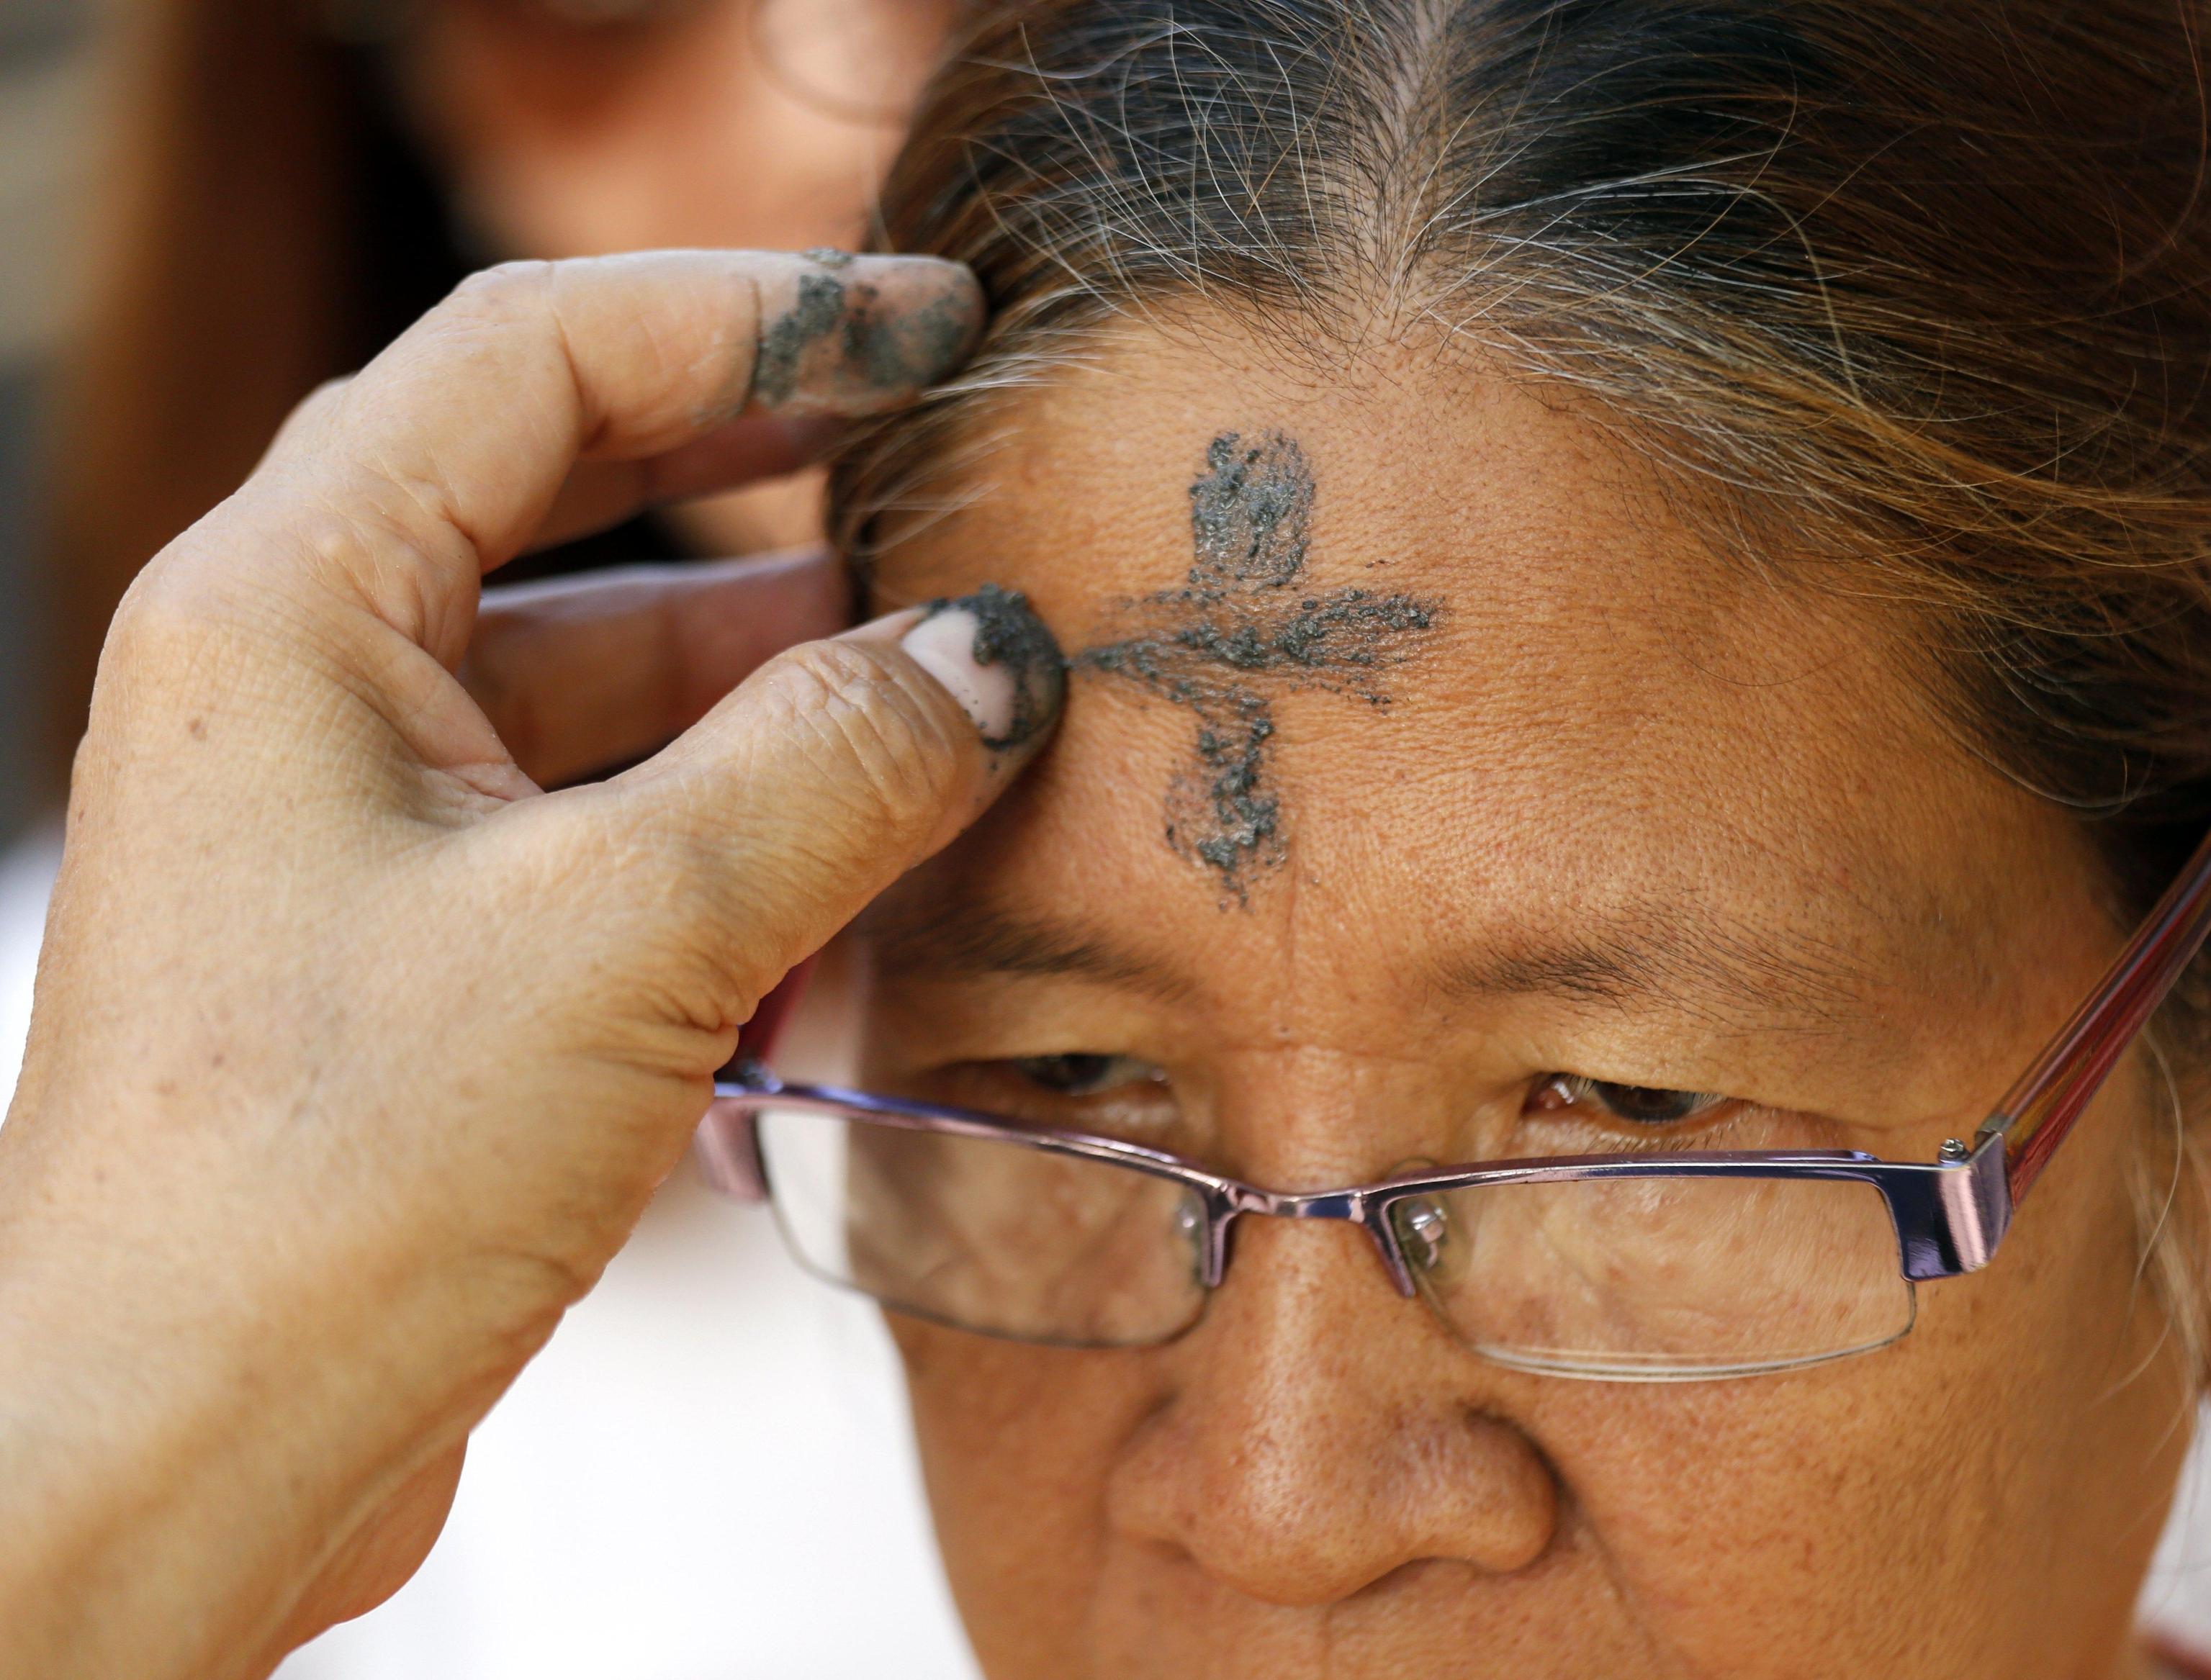 epa05822042 A Filipino devotee receives a black soot on her forehead to observe Ash Wednesday at a Catholic church  in Pasay city, south of Manila, Philippines, 01 March 2017. Filipino Catholic started the 40-day Lenten Season on Ash Wednesday by going to church to have their forehead marked with an ash cross sign. The rite is part of the culture of many Filipino Catholics, symbolizing their acceptance for the start of Lent and to show their sincere efforts and discipline to cleanse their lives of sin through prayers.  EPA/FRANCIS R. MALASIG